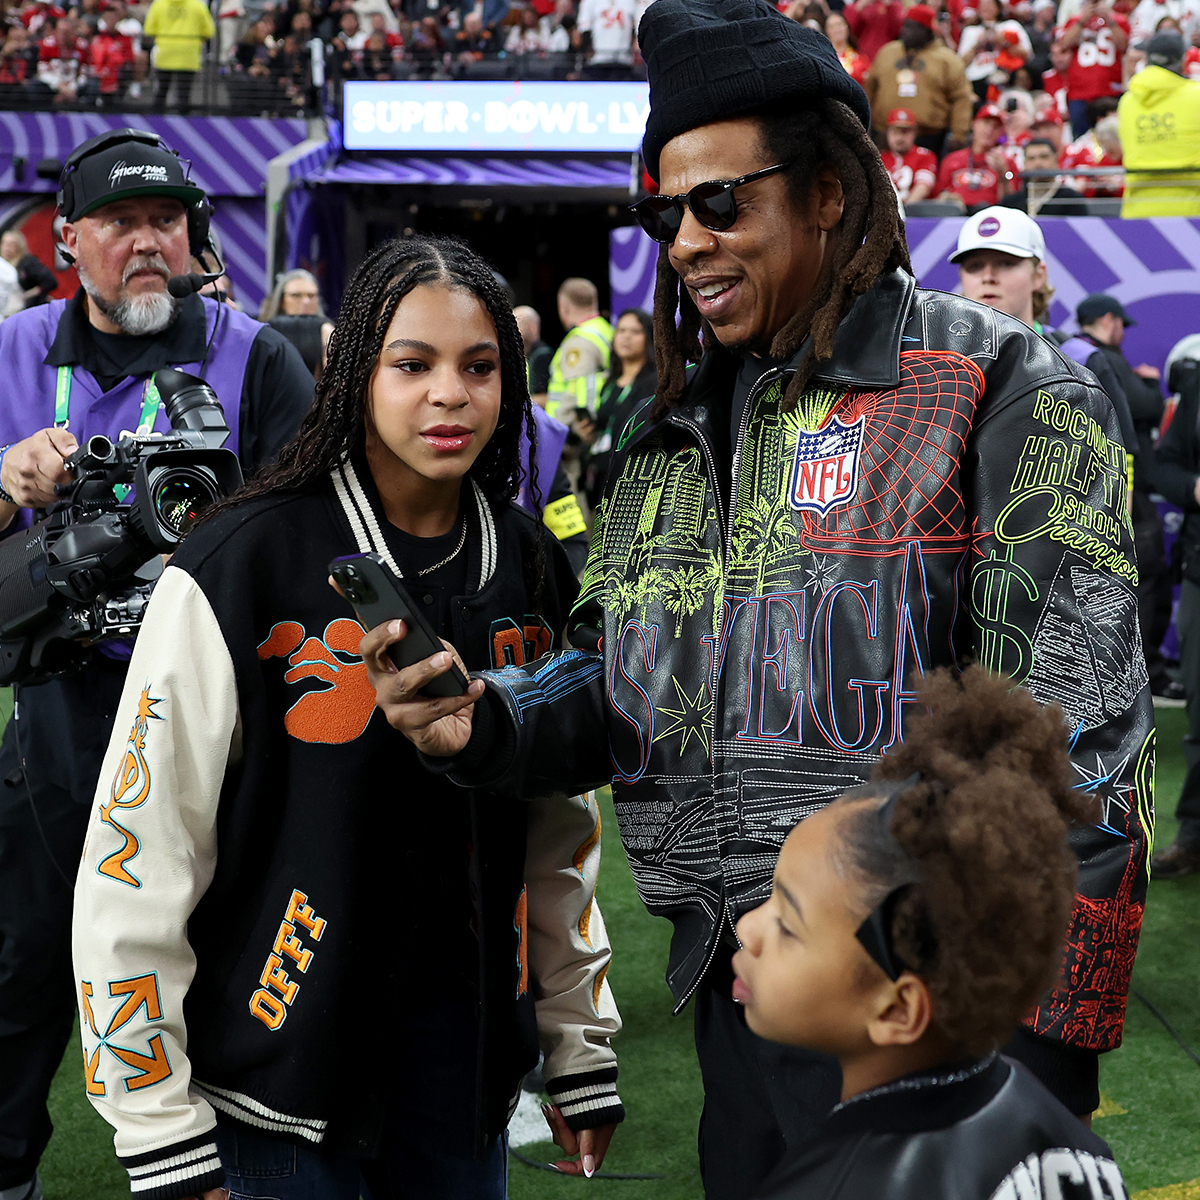 Blue Ivy Carter News, Pictures, and Videos - E! Online